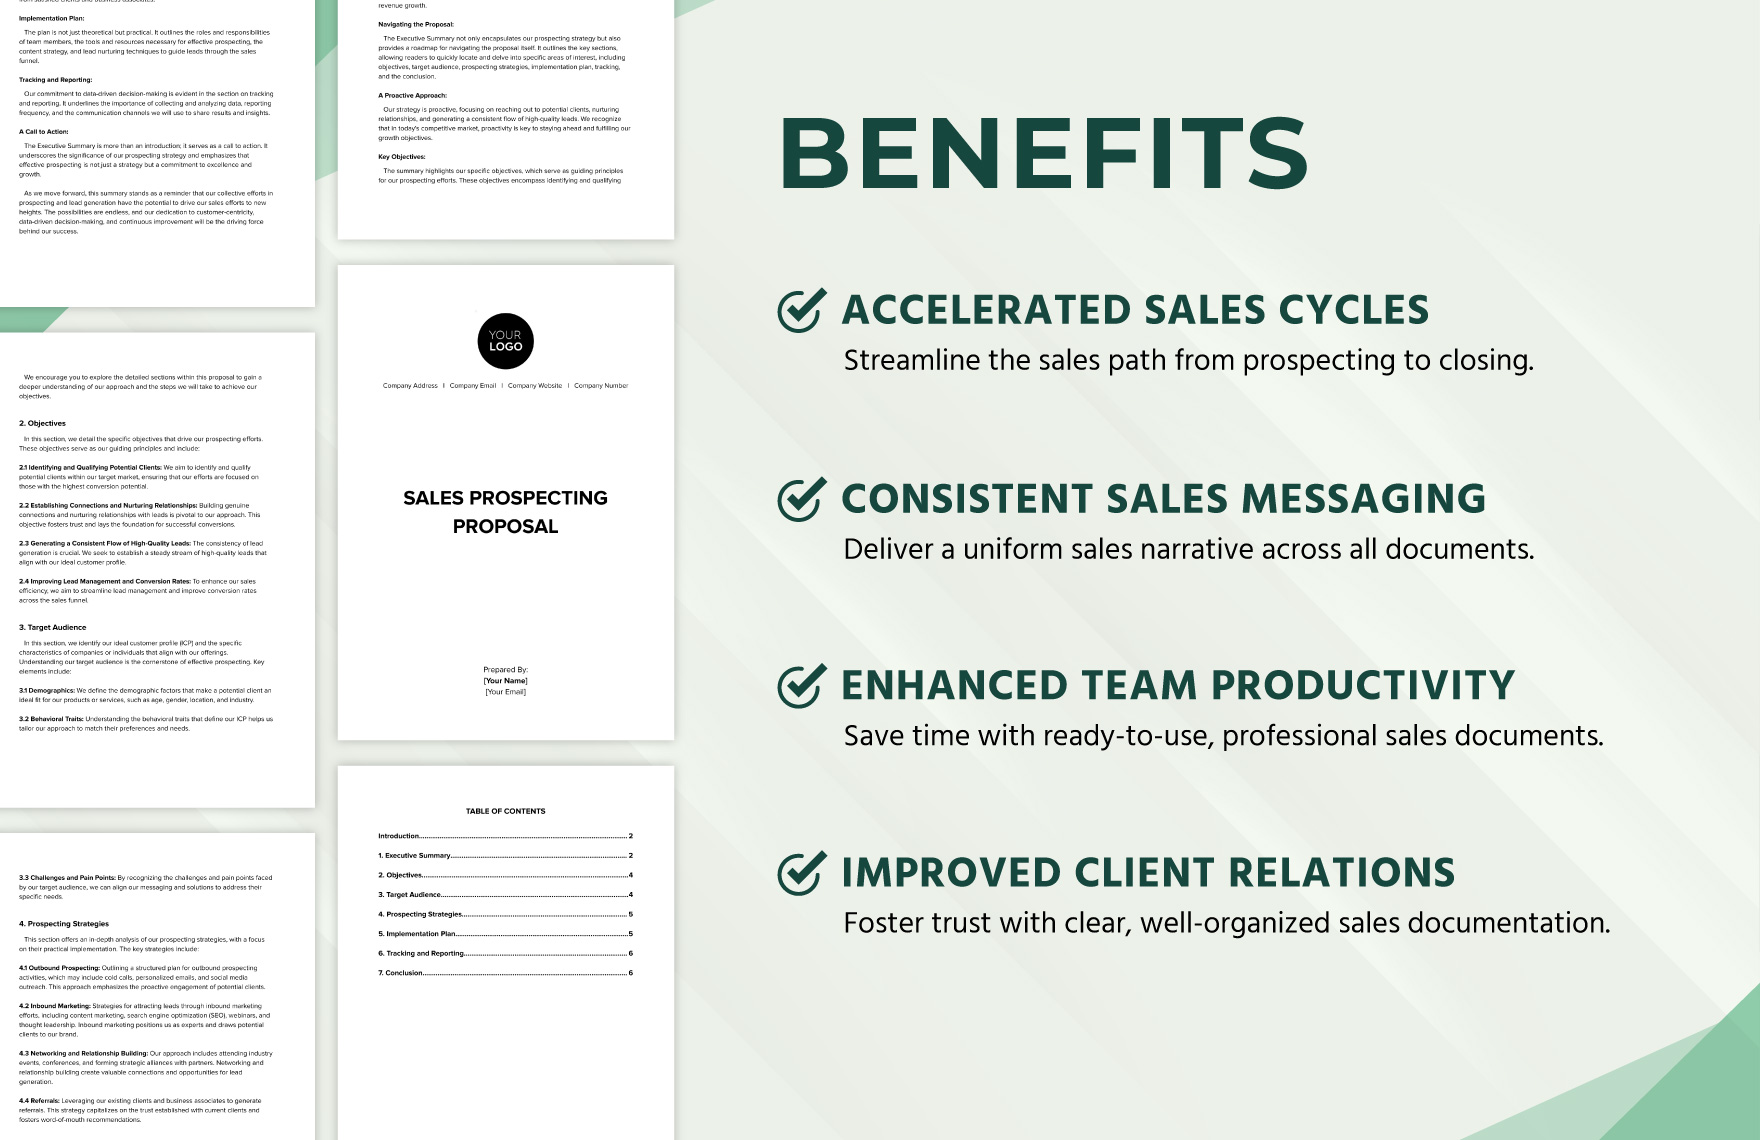 Sales Prospecting Proposal Template